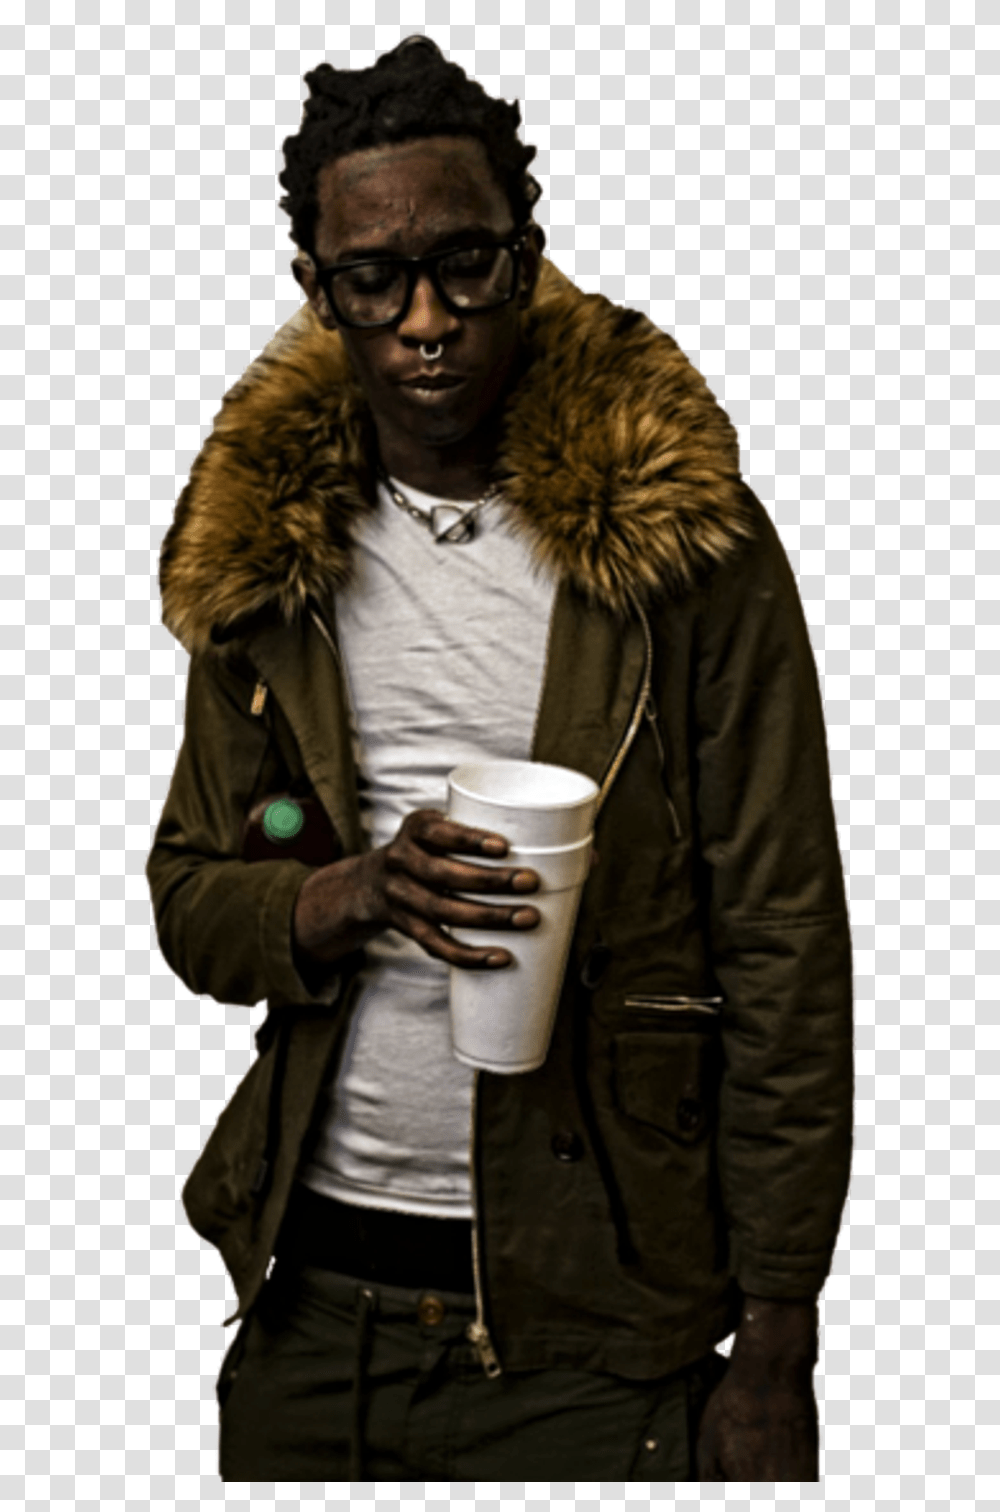 Download Share This Image Young Thug Background, Clothing, Jacket, Coat, Overcoat Transparent Png